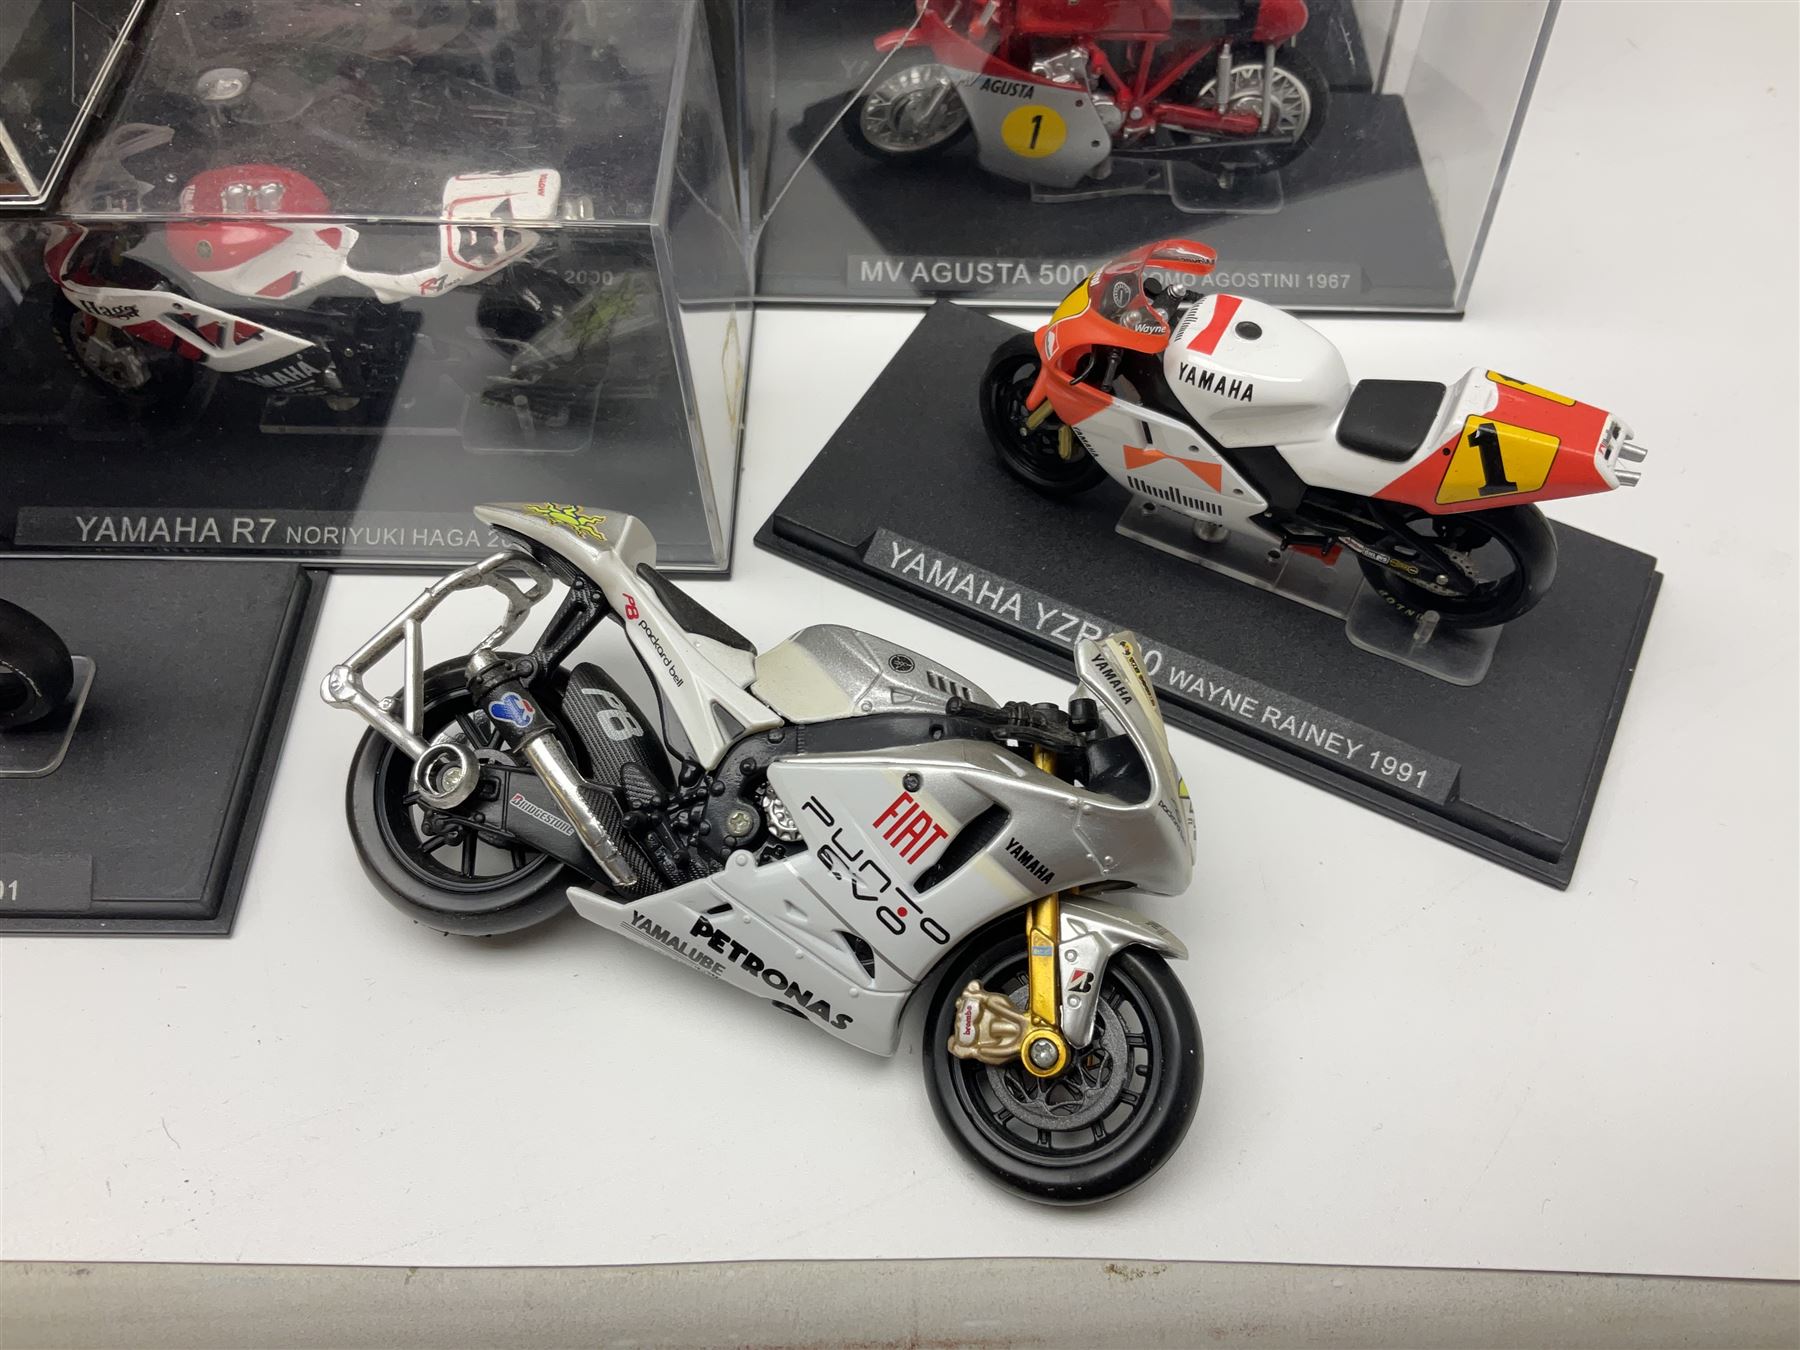 Fifty-one die-cast models of motorcycles by Maisto - Image 3 of 18